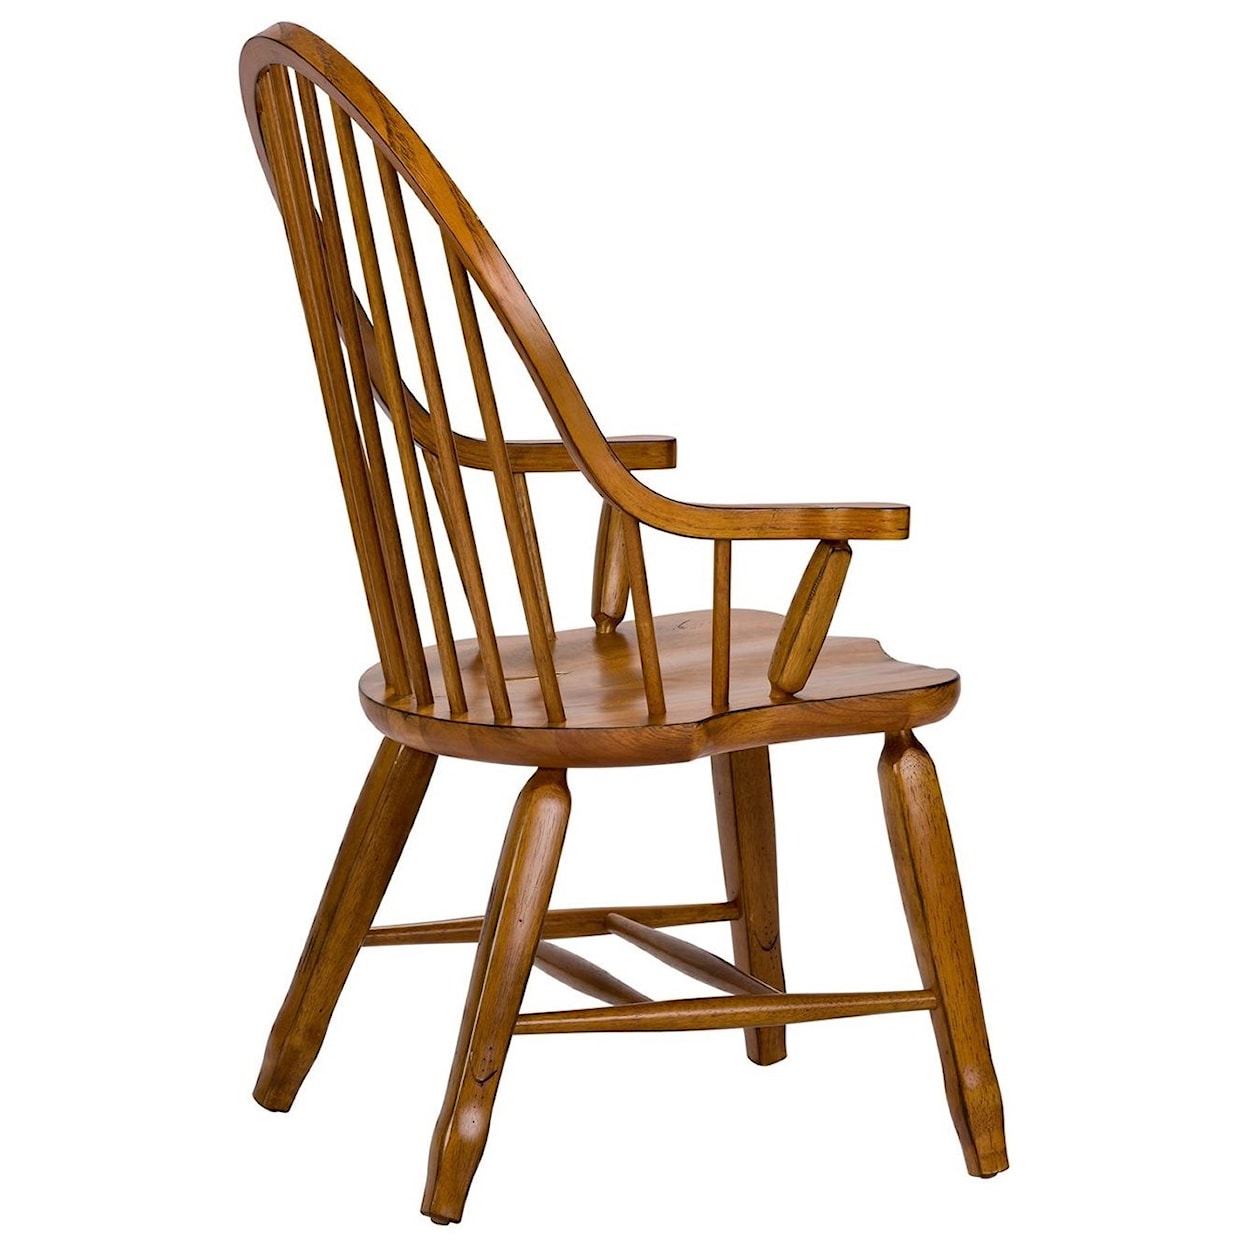 Liberty Furniture Treasures 17 Bow Back Arm Chair